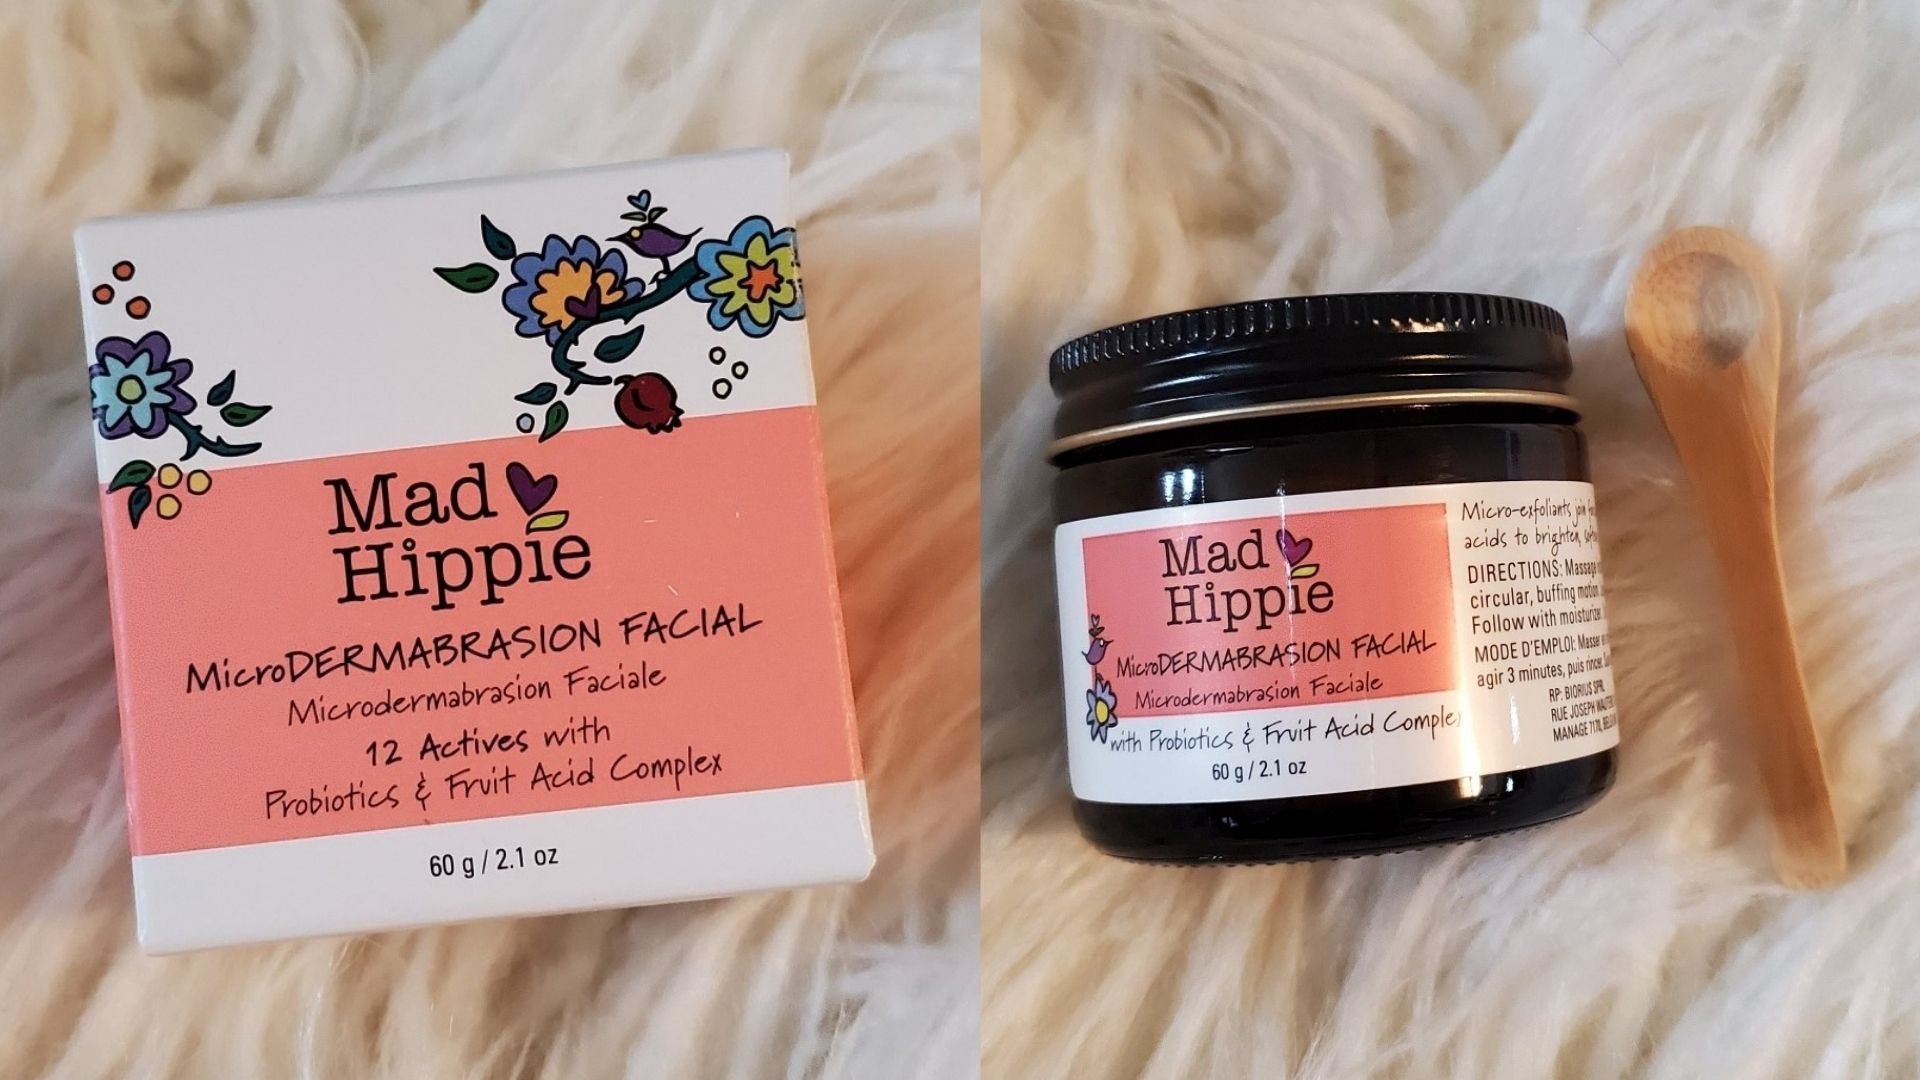 review, skincare, ingredients, trend, 2020, 2021, mad hippie, microdermabrasion facial, glycolic acid, aha, alpha hydroxy acid, probiotics, how to get rid of dull skin, chemical exfoliants